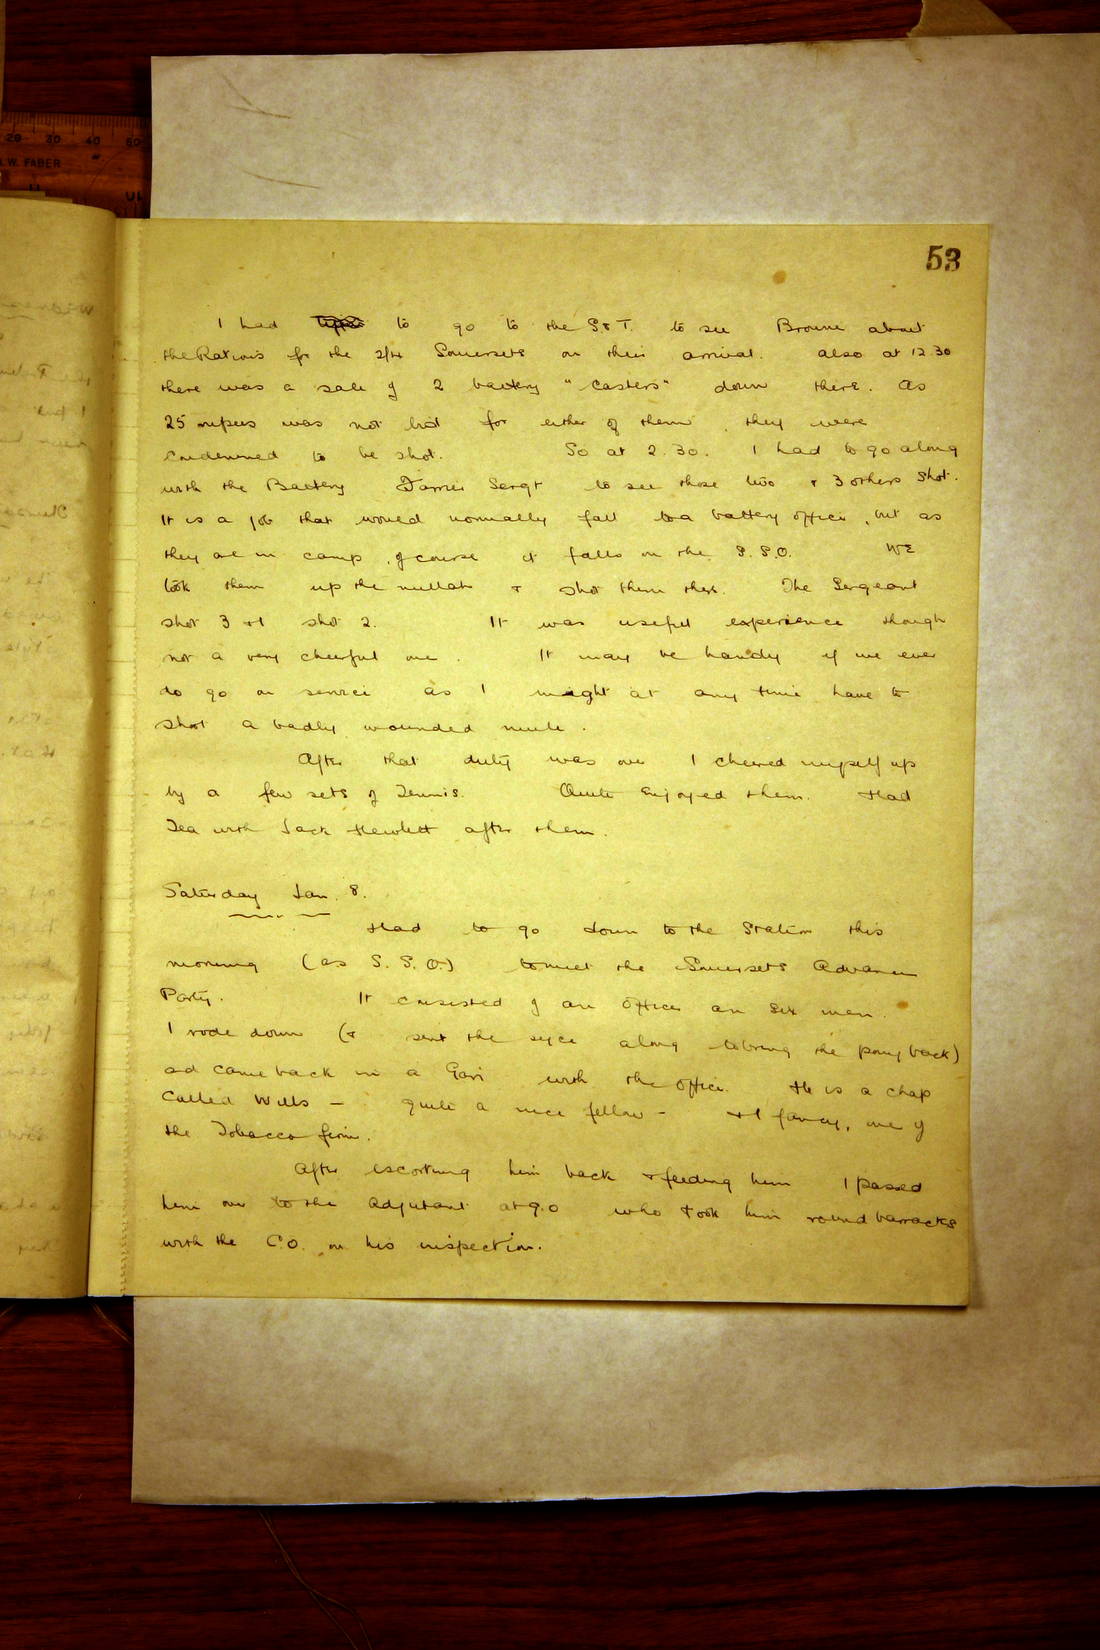 Scanned image of page book11 img_15037.jpg